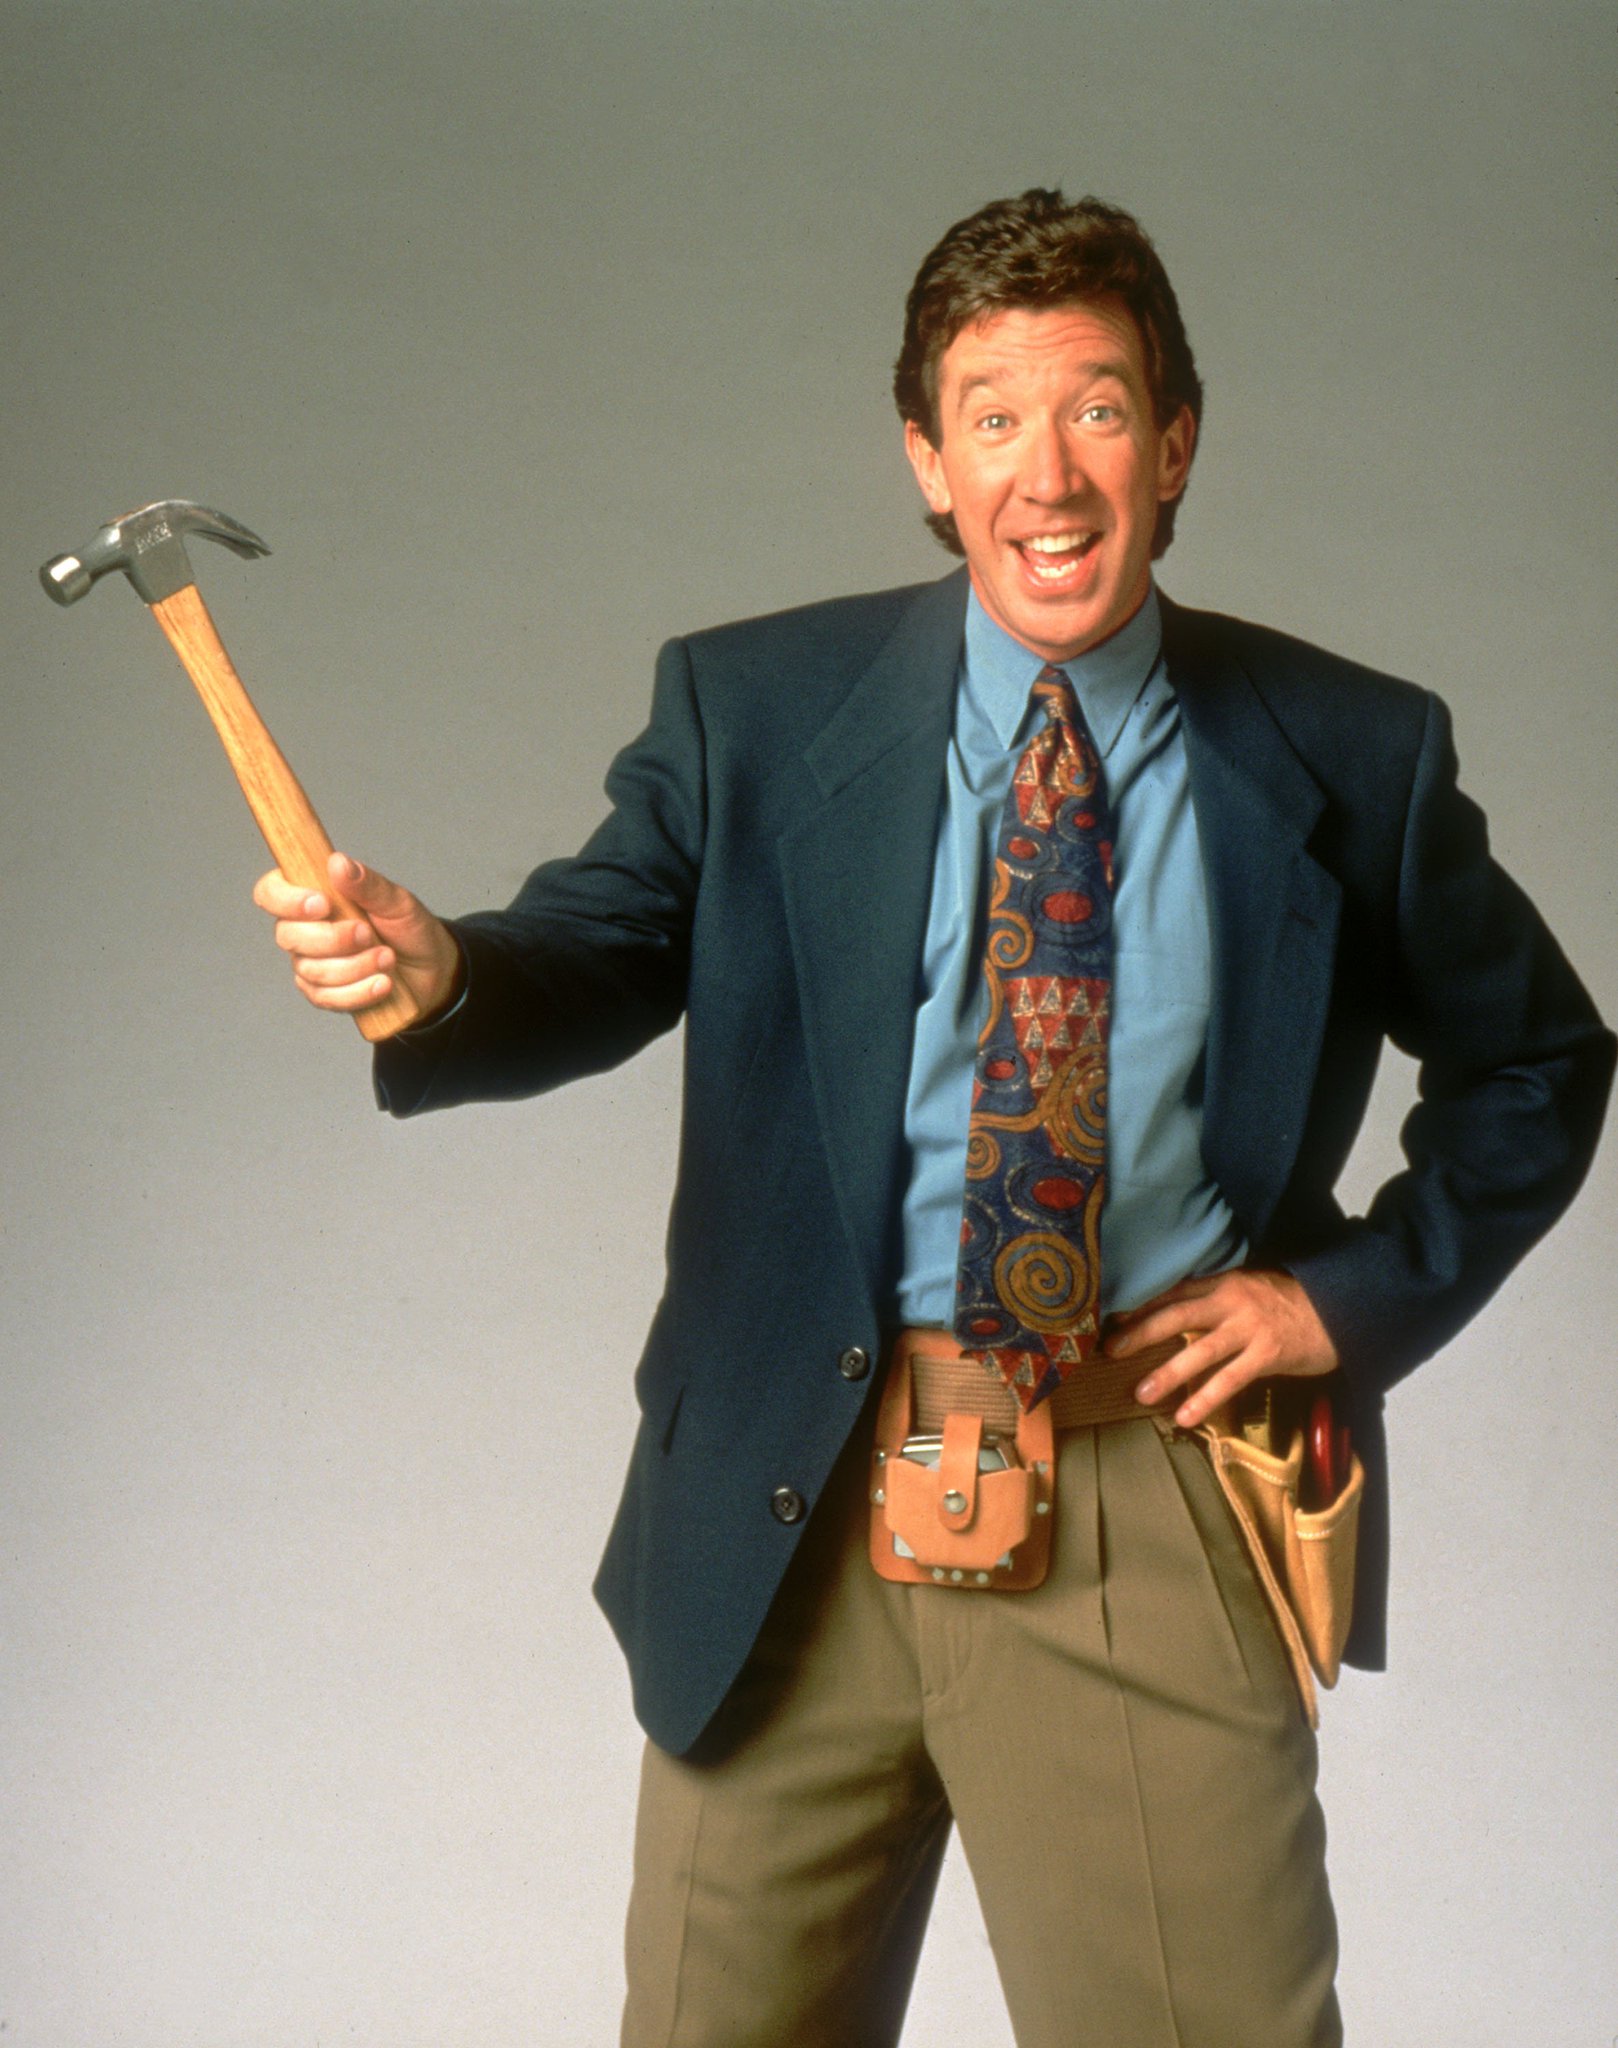 Happy Birthday to Tim Allen who turns 65 today!  